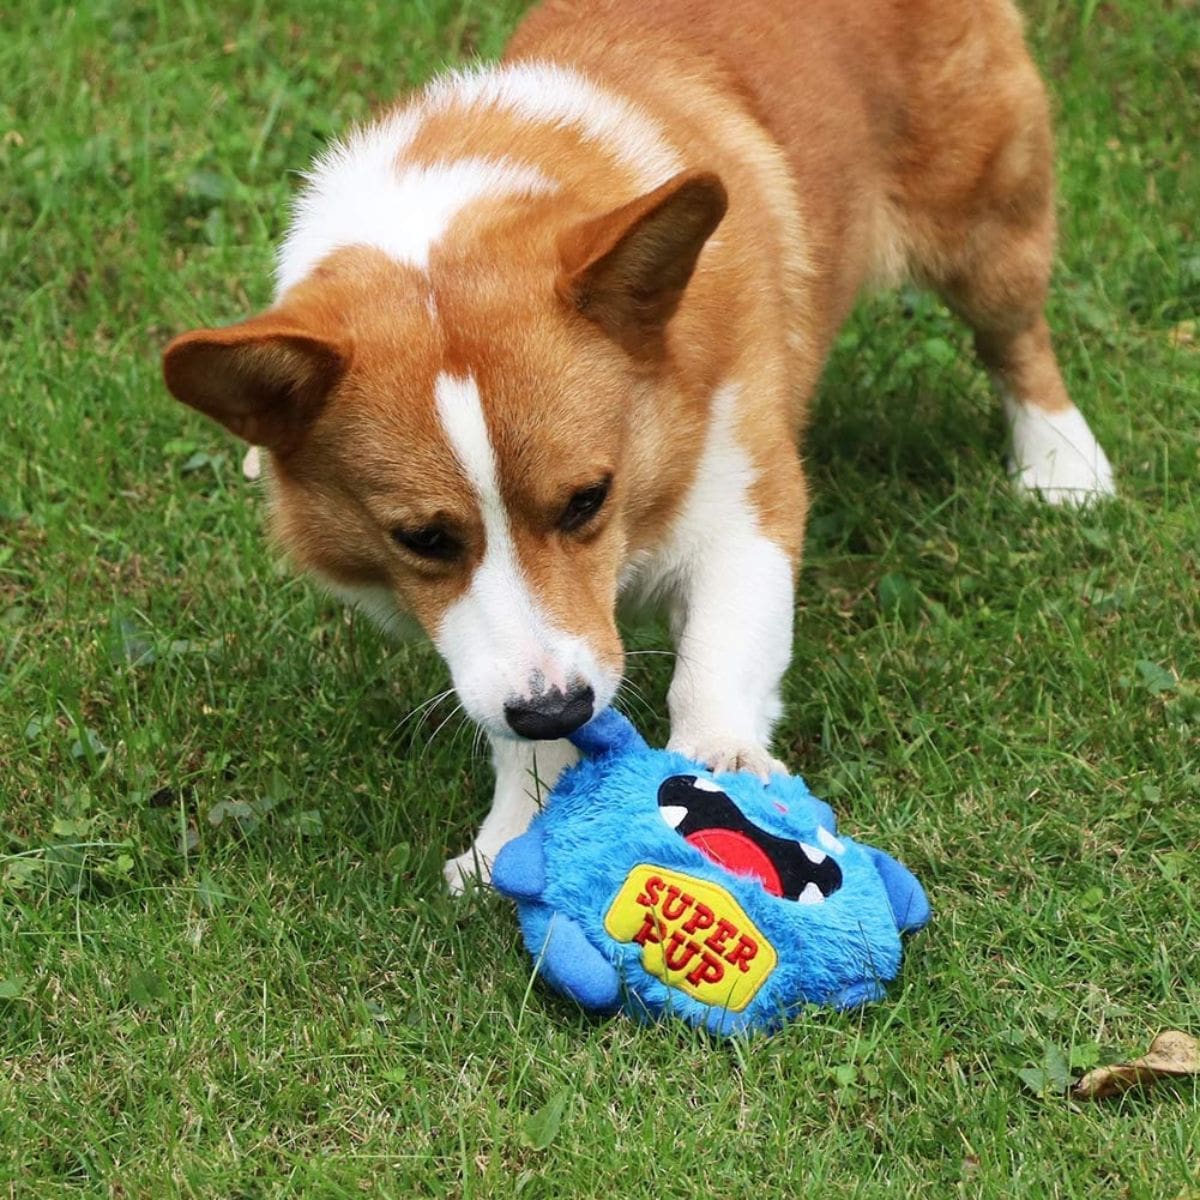 Welsh corgi playing with interactive dog toy Crazy monster Super pup